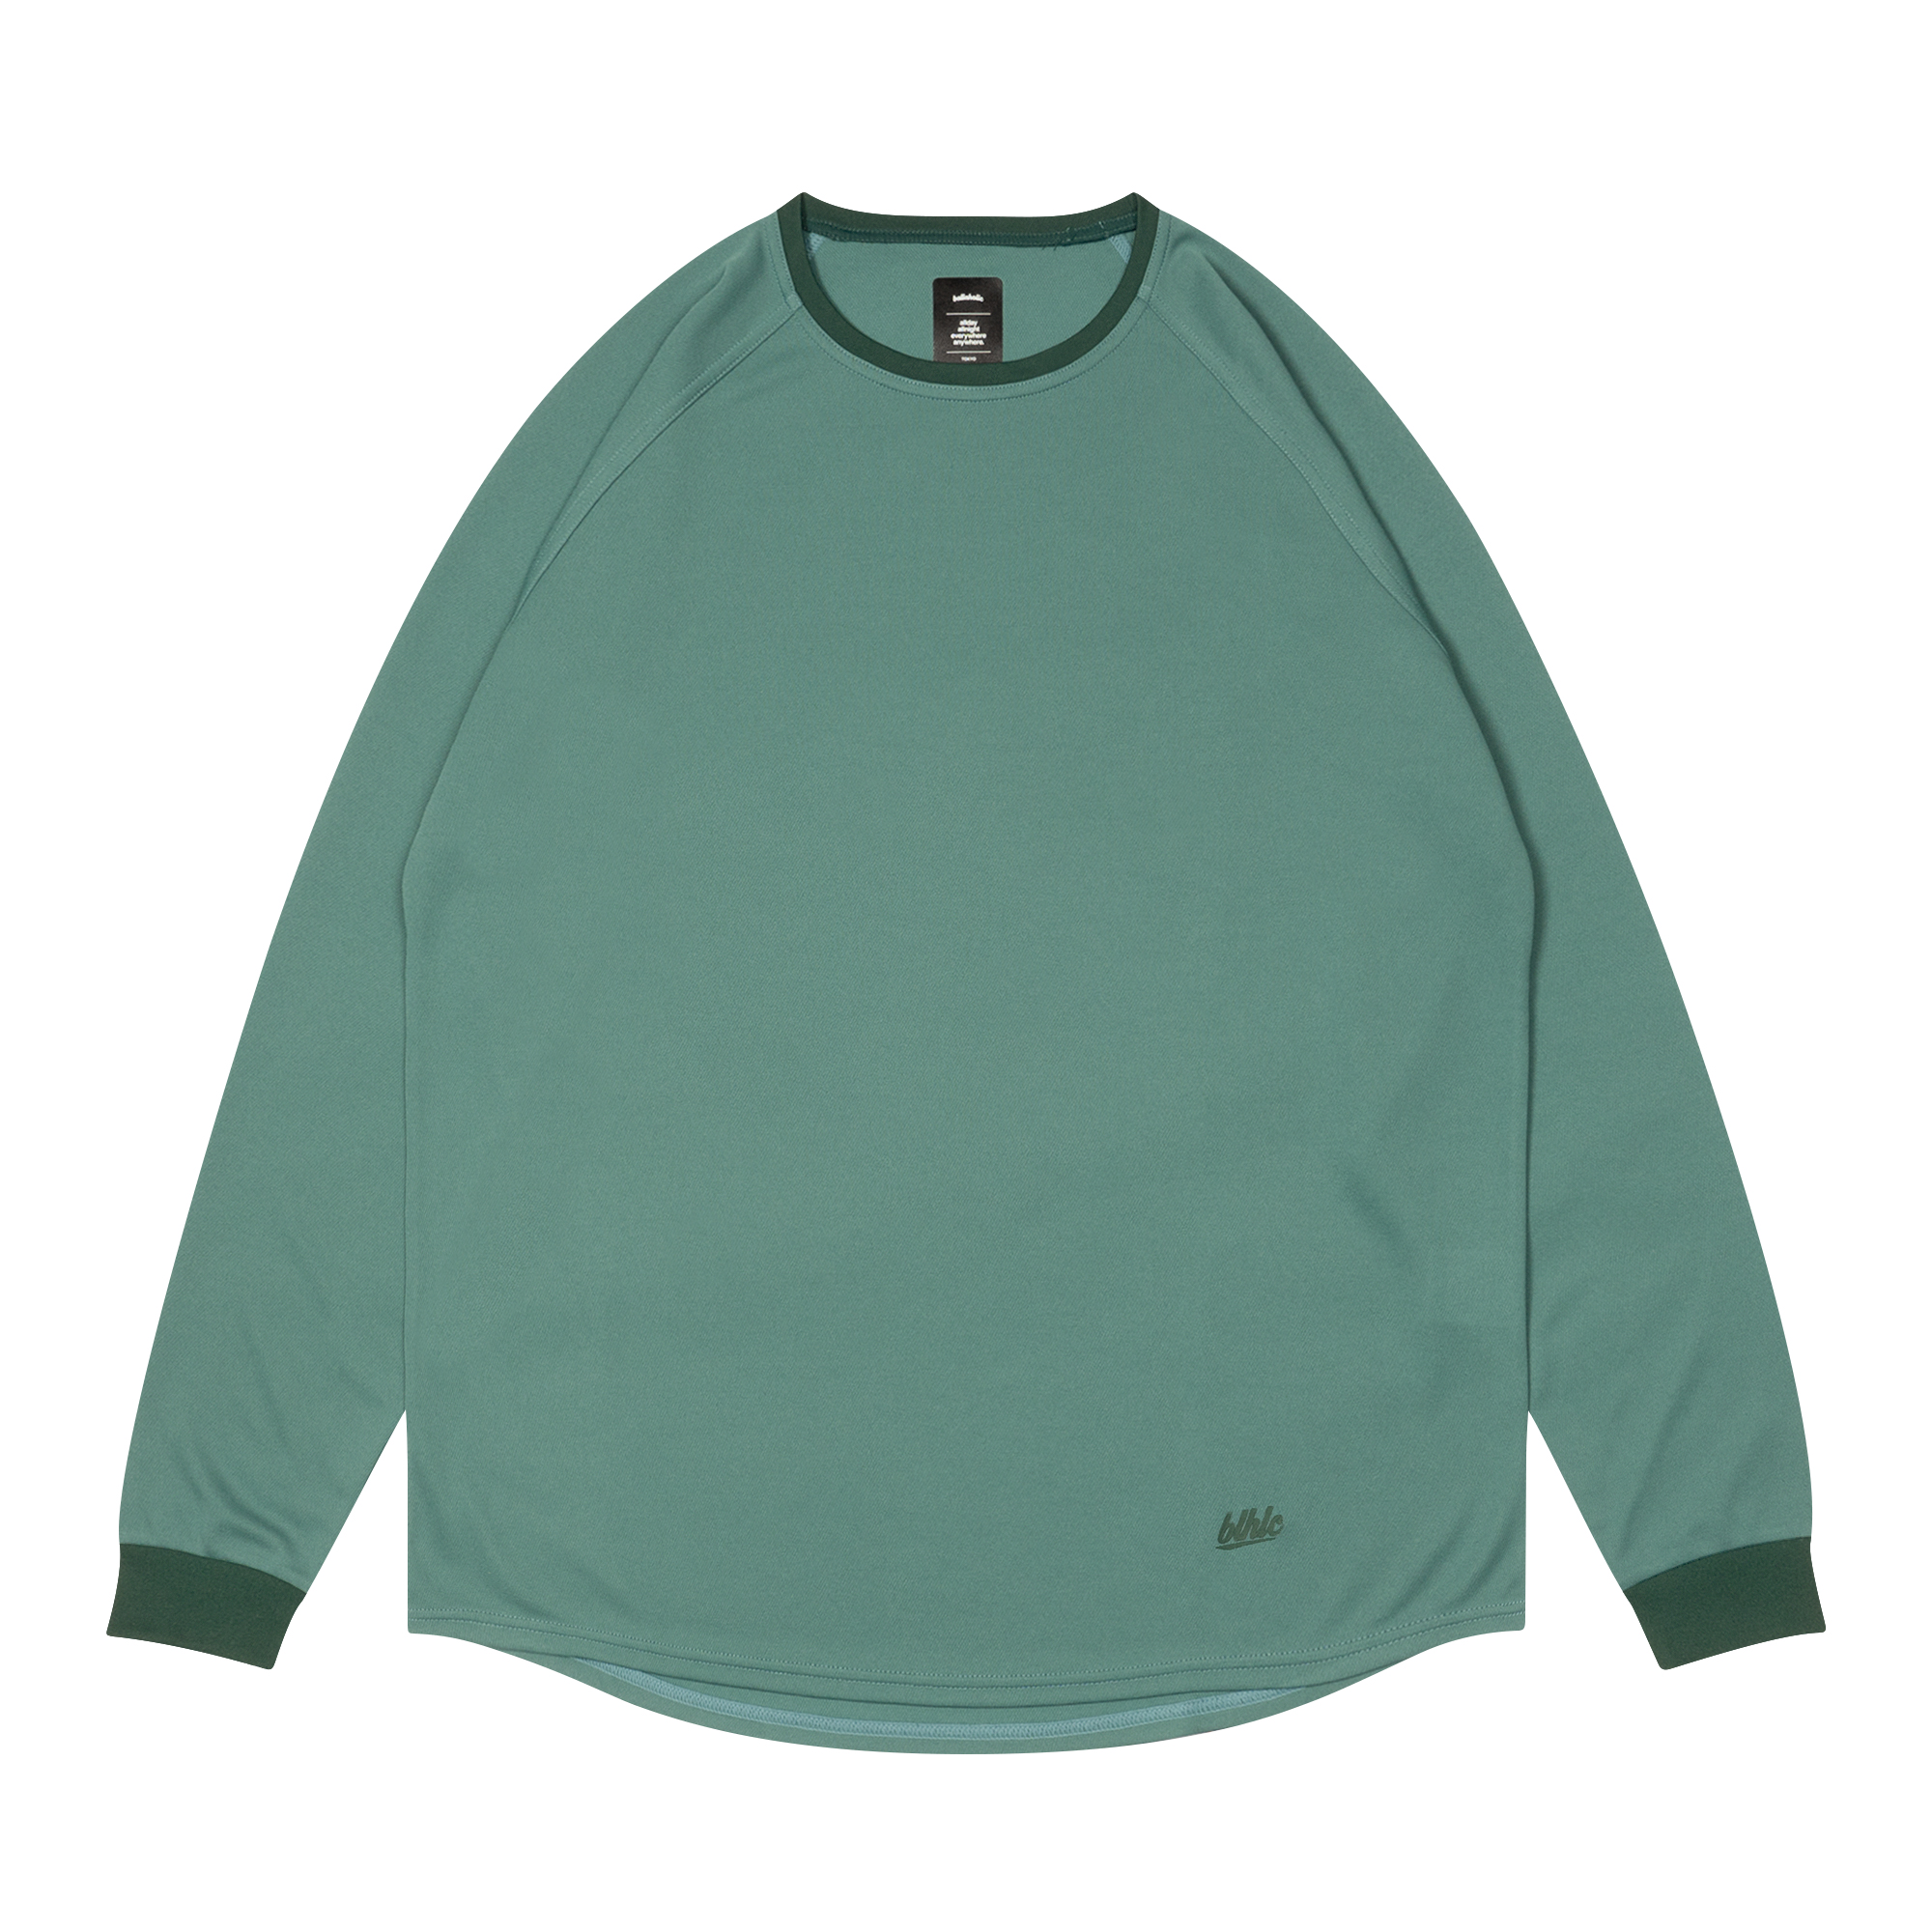 blhlc Cool Long Tee (pine green)